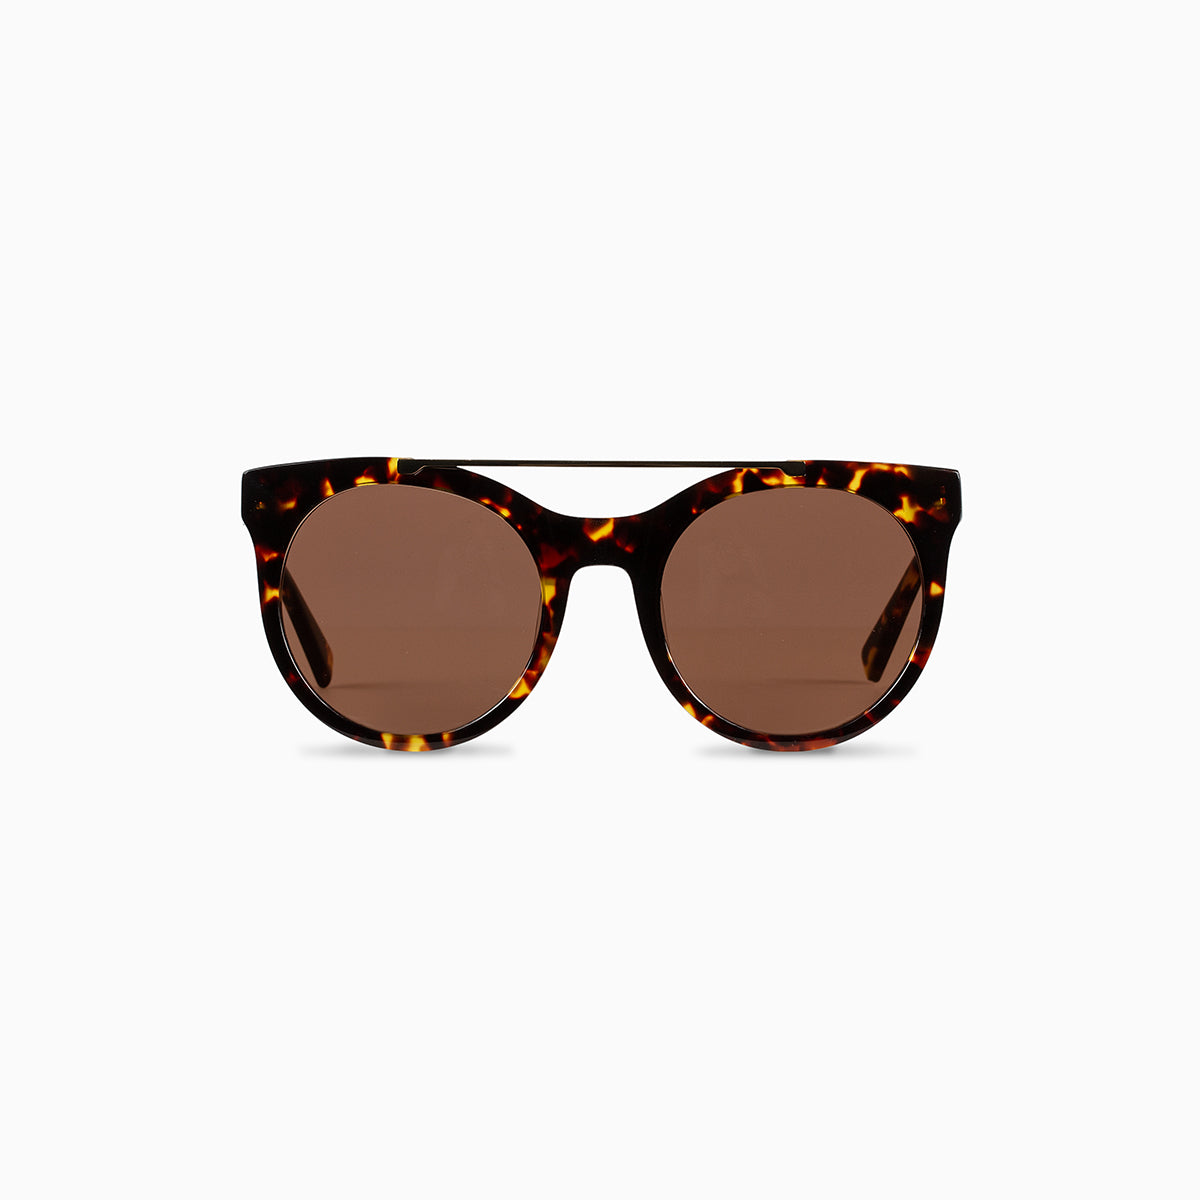 Brow Bar Round Sunglasses | Tort | Product Image | Uncommon James Home